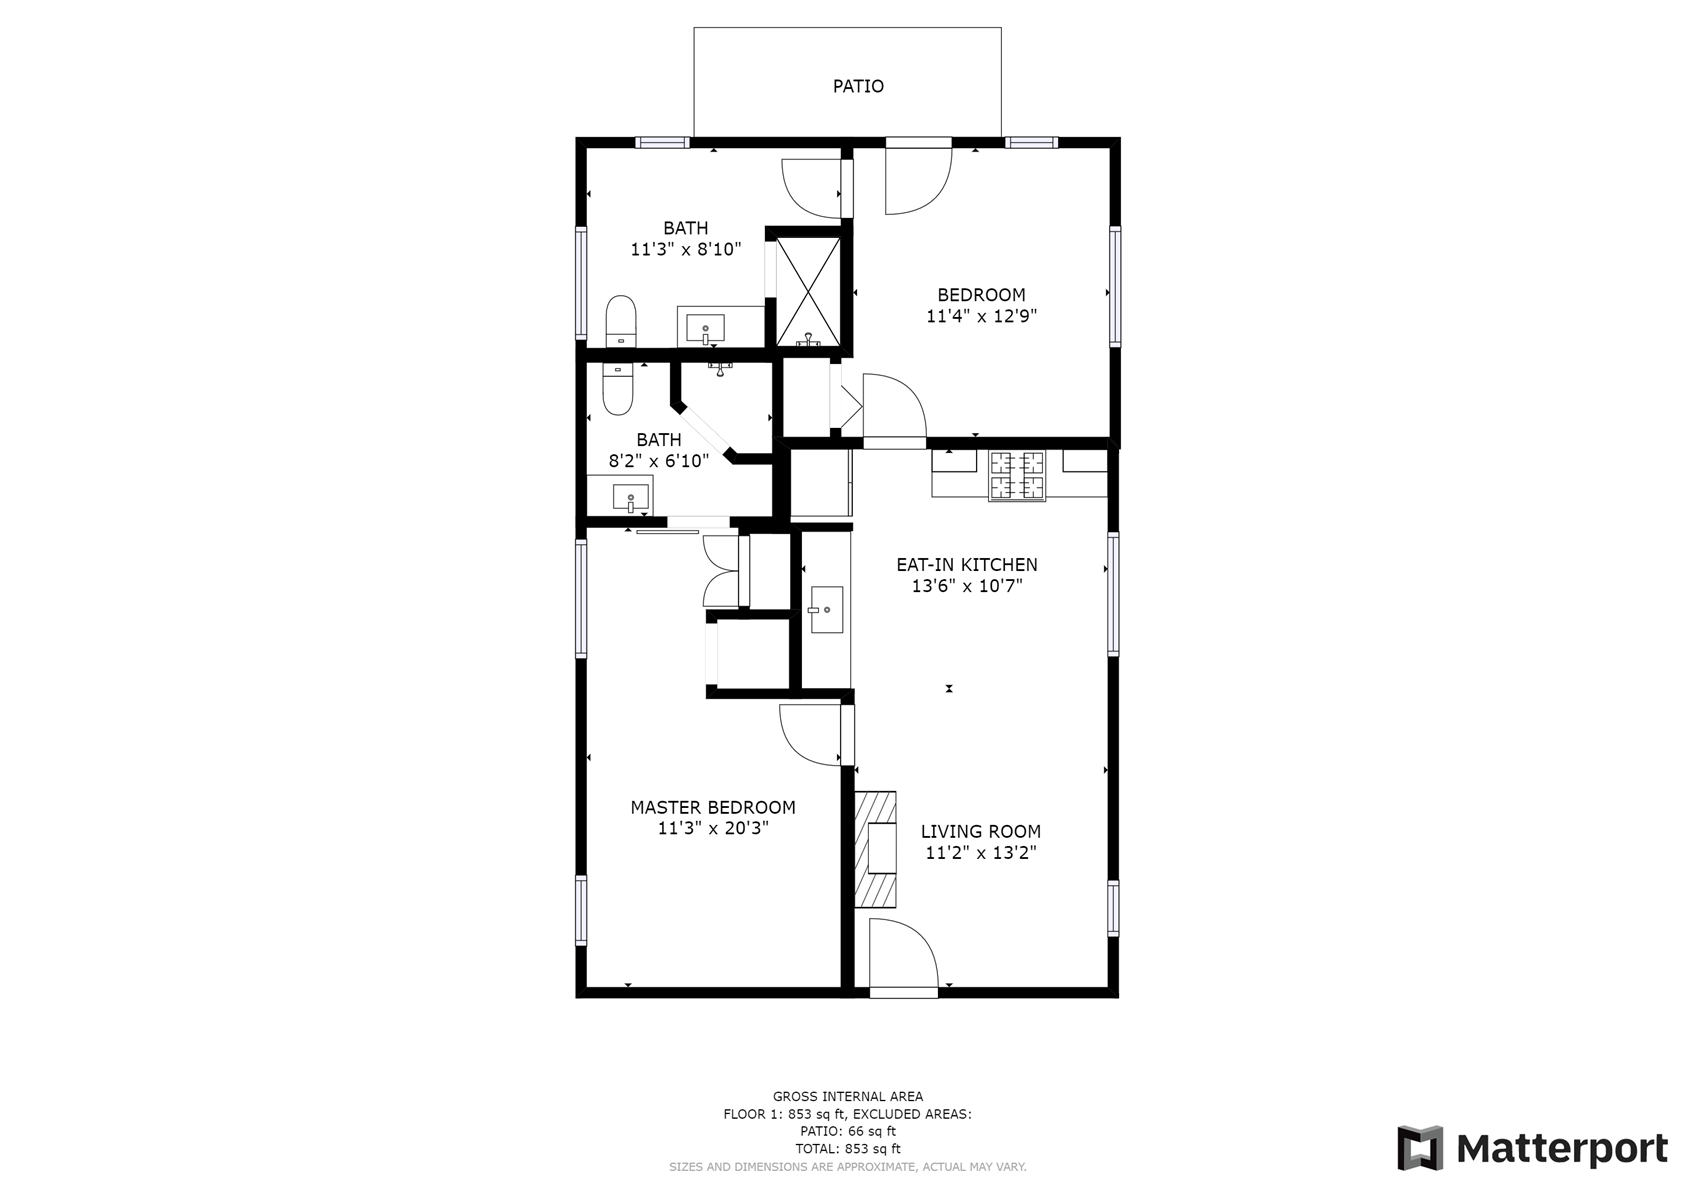 Floor Plan for El Rito Casita: NEW Casita in The Downtown Railyard District just a short walk to the Plaza